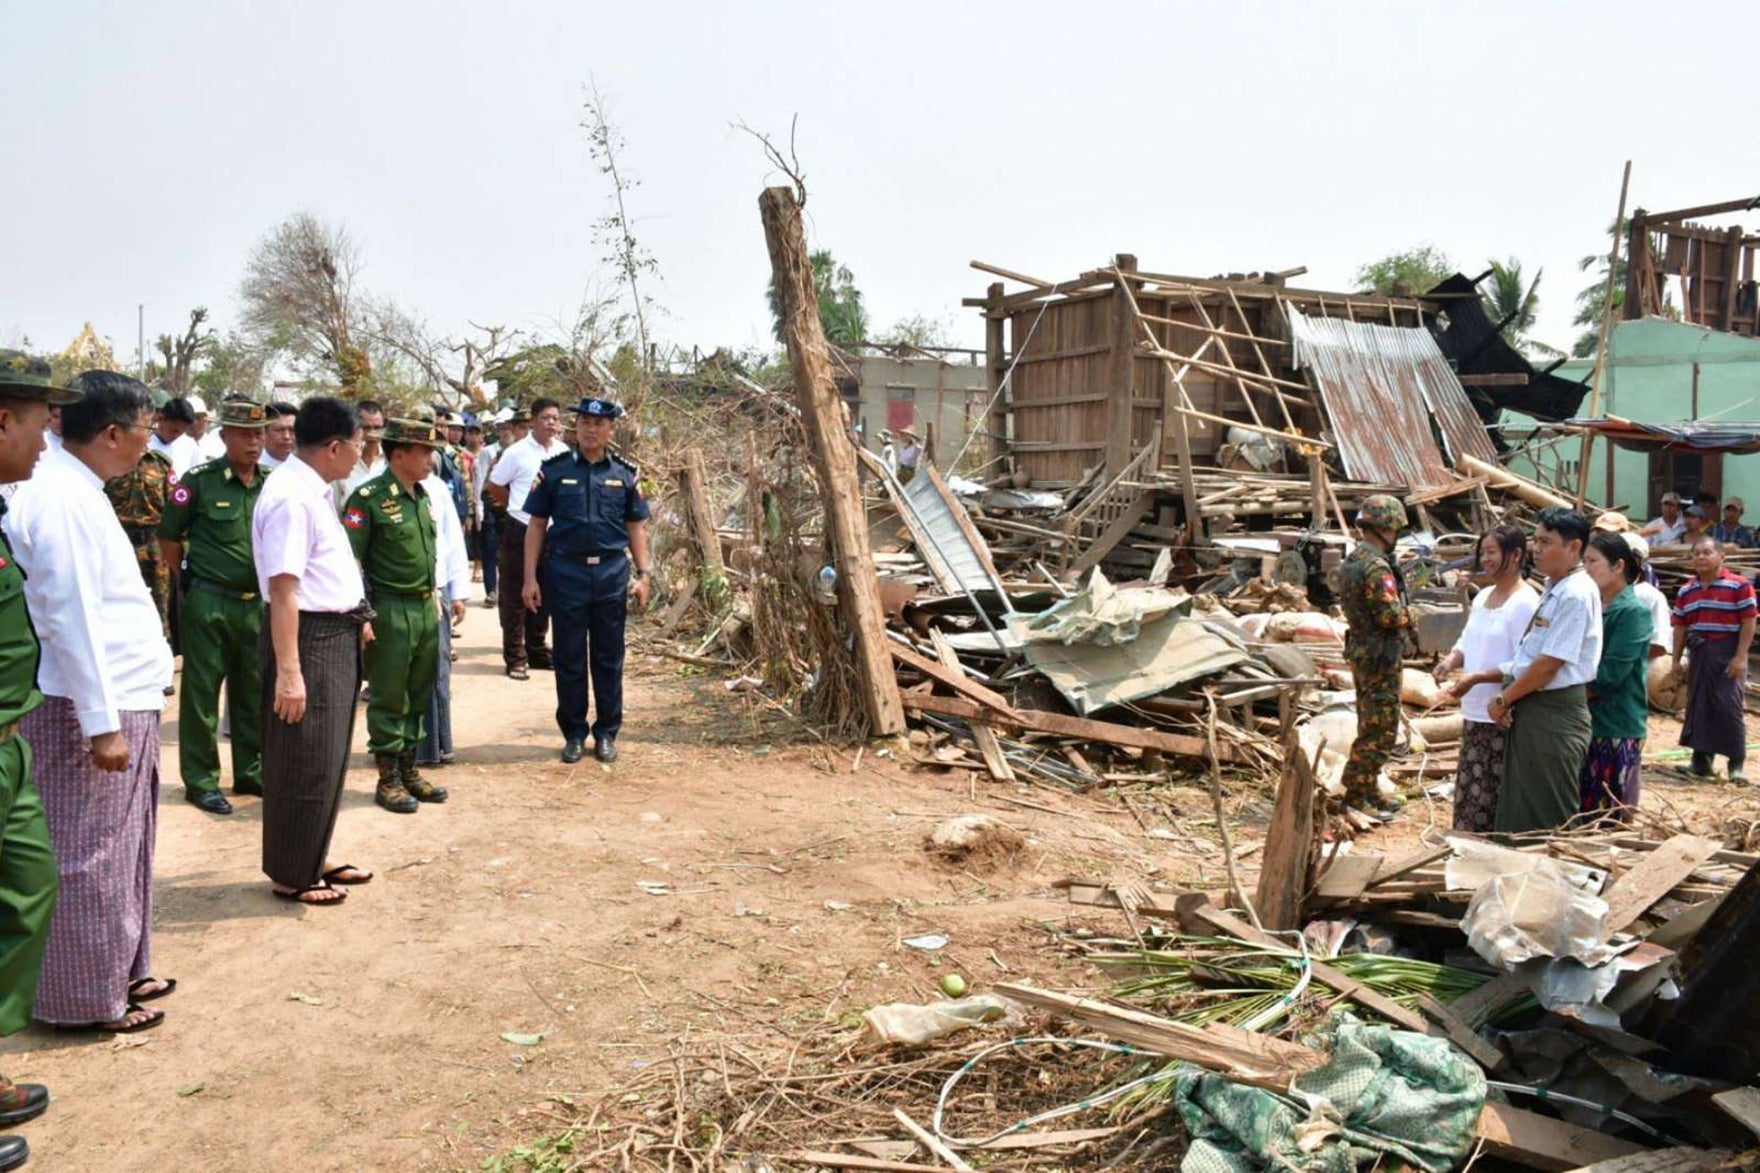 8 killed, 109 injured after deadly tornado hits central Myanmar The